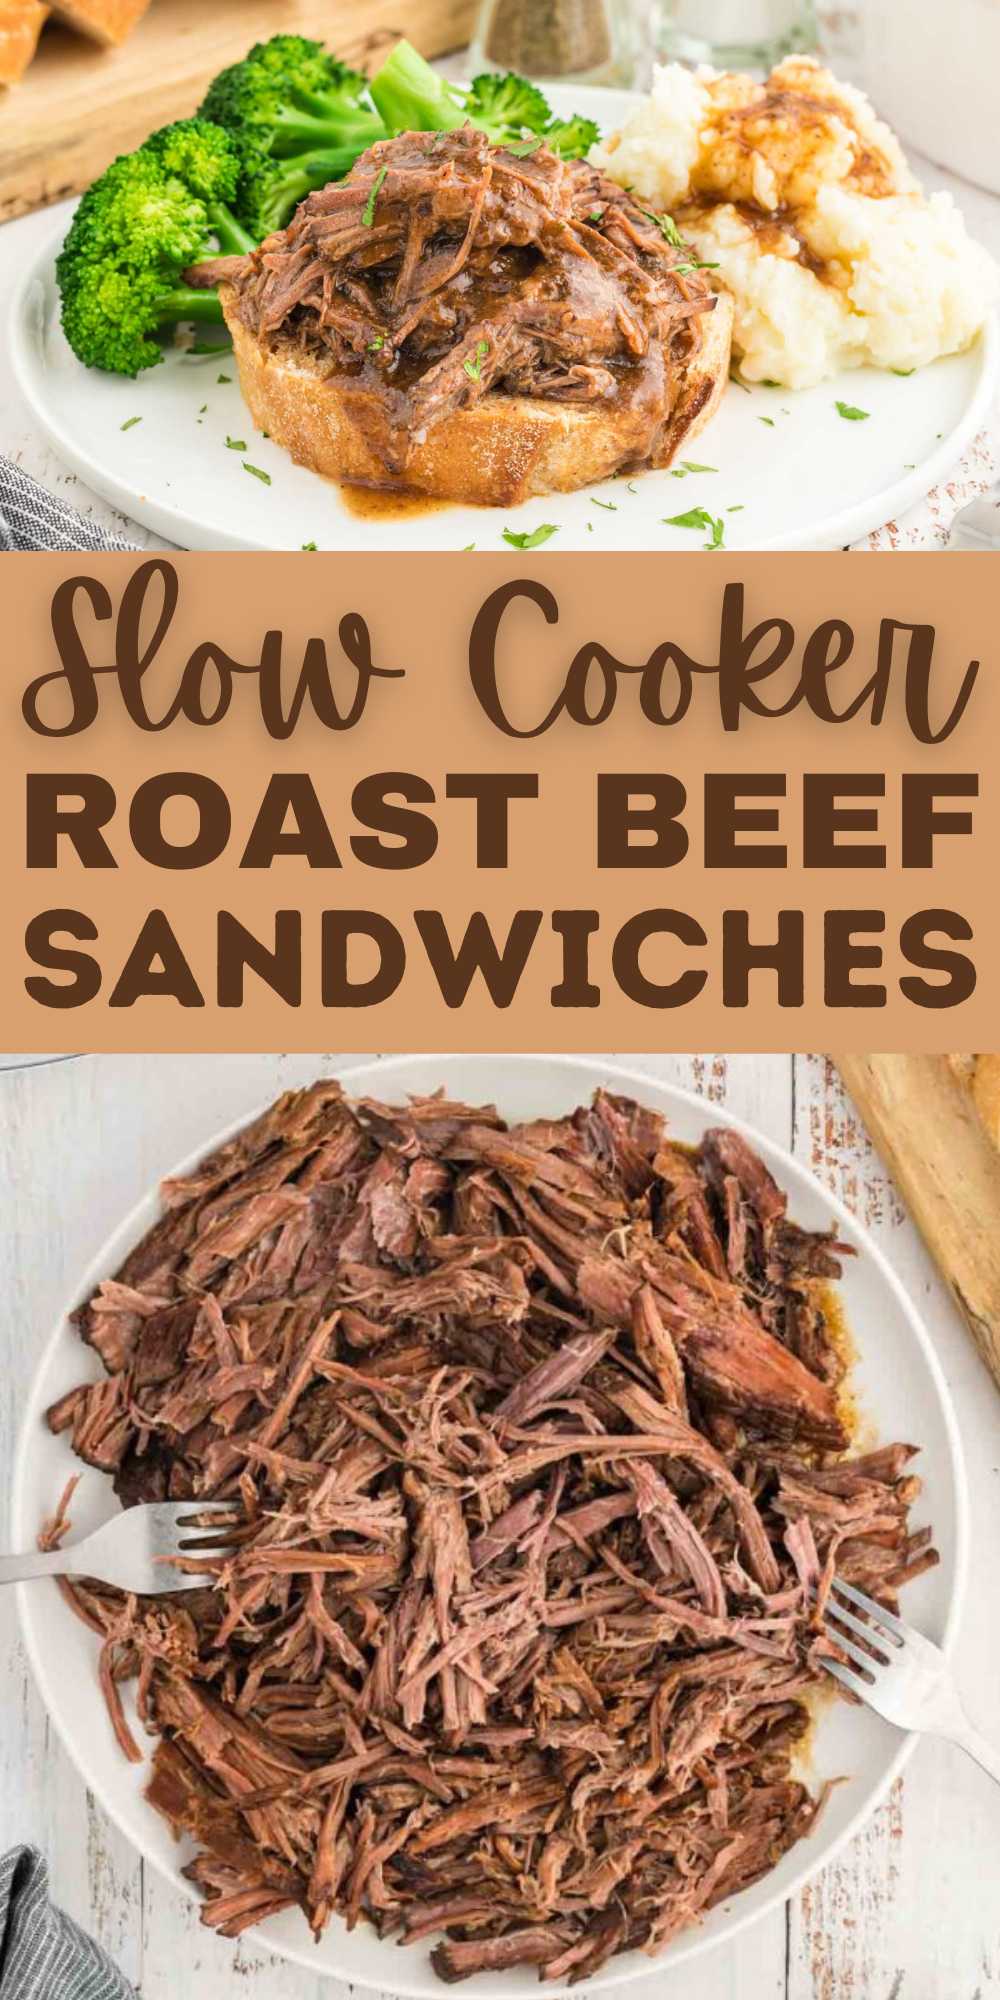 Slow Cooker Roast Beef Sandwiches is easy to make thanks to the crockpot. Simple ingredients makes this hot roast beef sandwich an easy meal. This slow cooker recipe is a simple dump and go dish. Making a roast in the crock pot is my favorite as the roast comes out tender, juicy and full of flavor. #eatingonadime #slowcookerroastbeef #roastbeefsandwiches